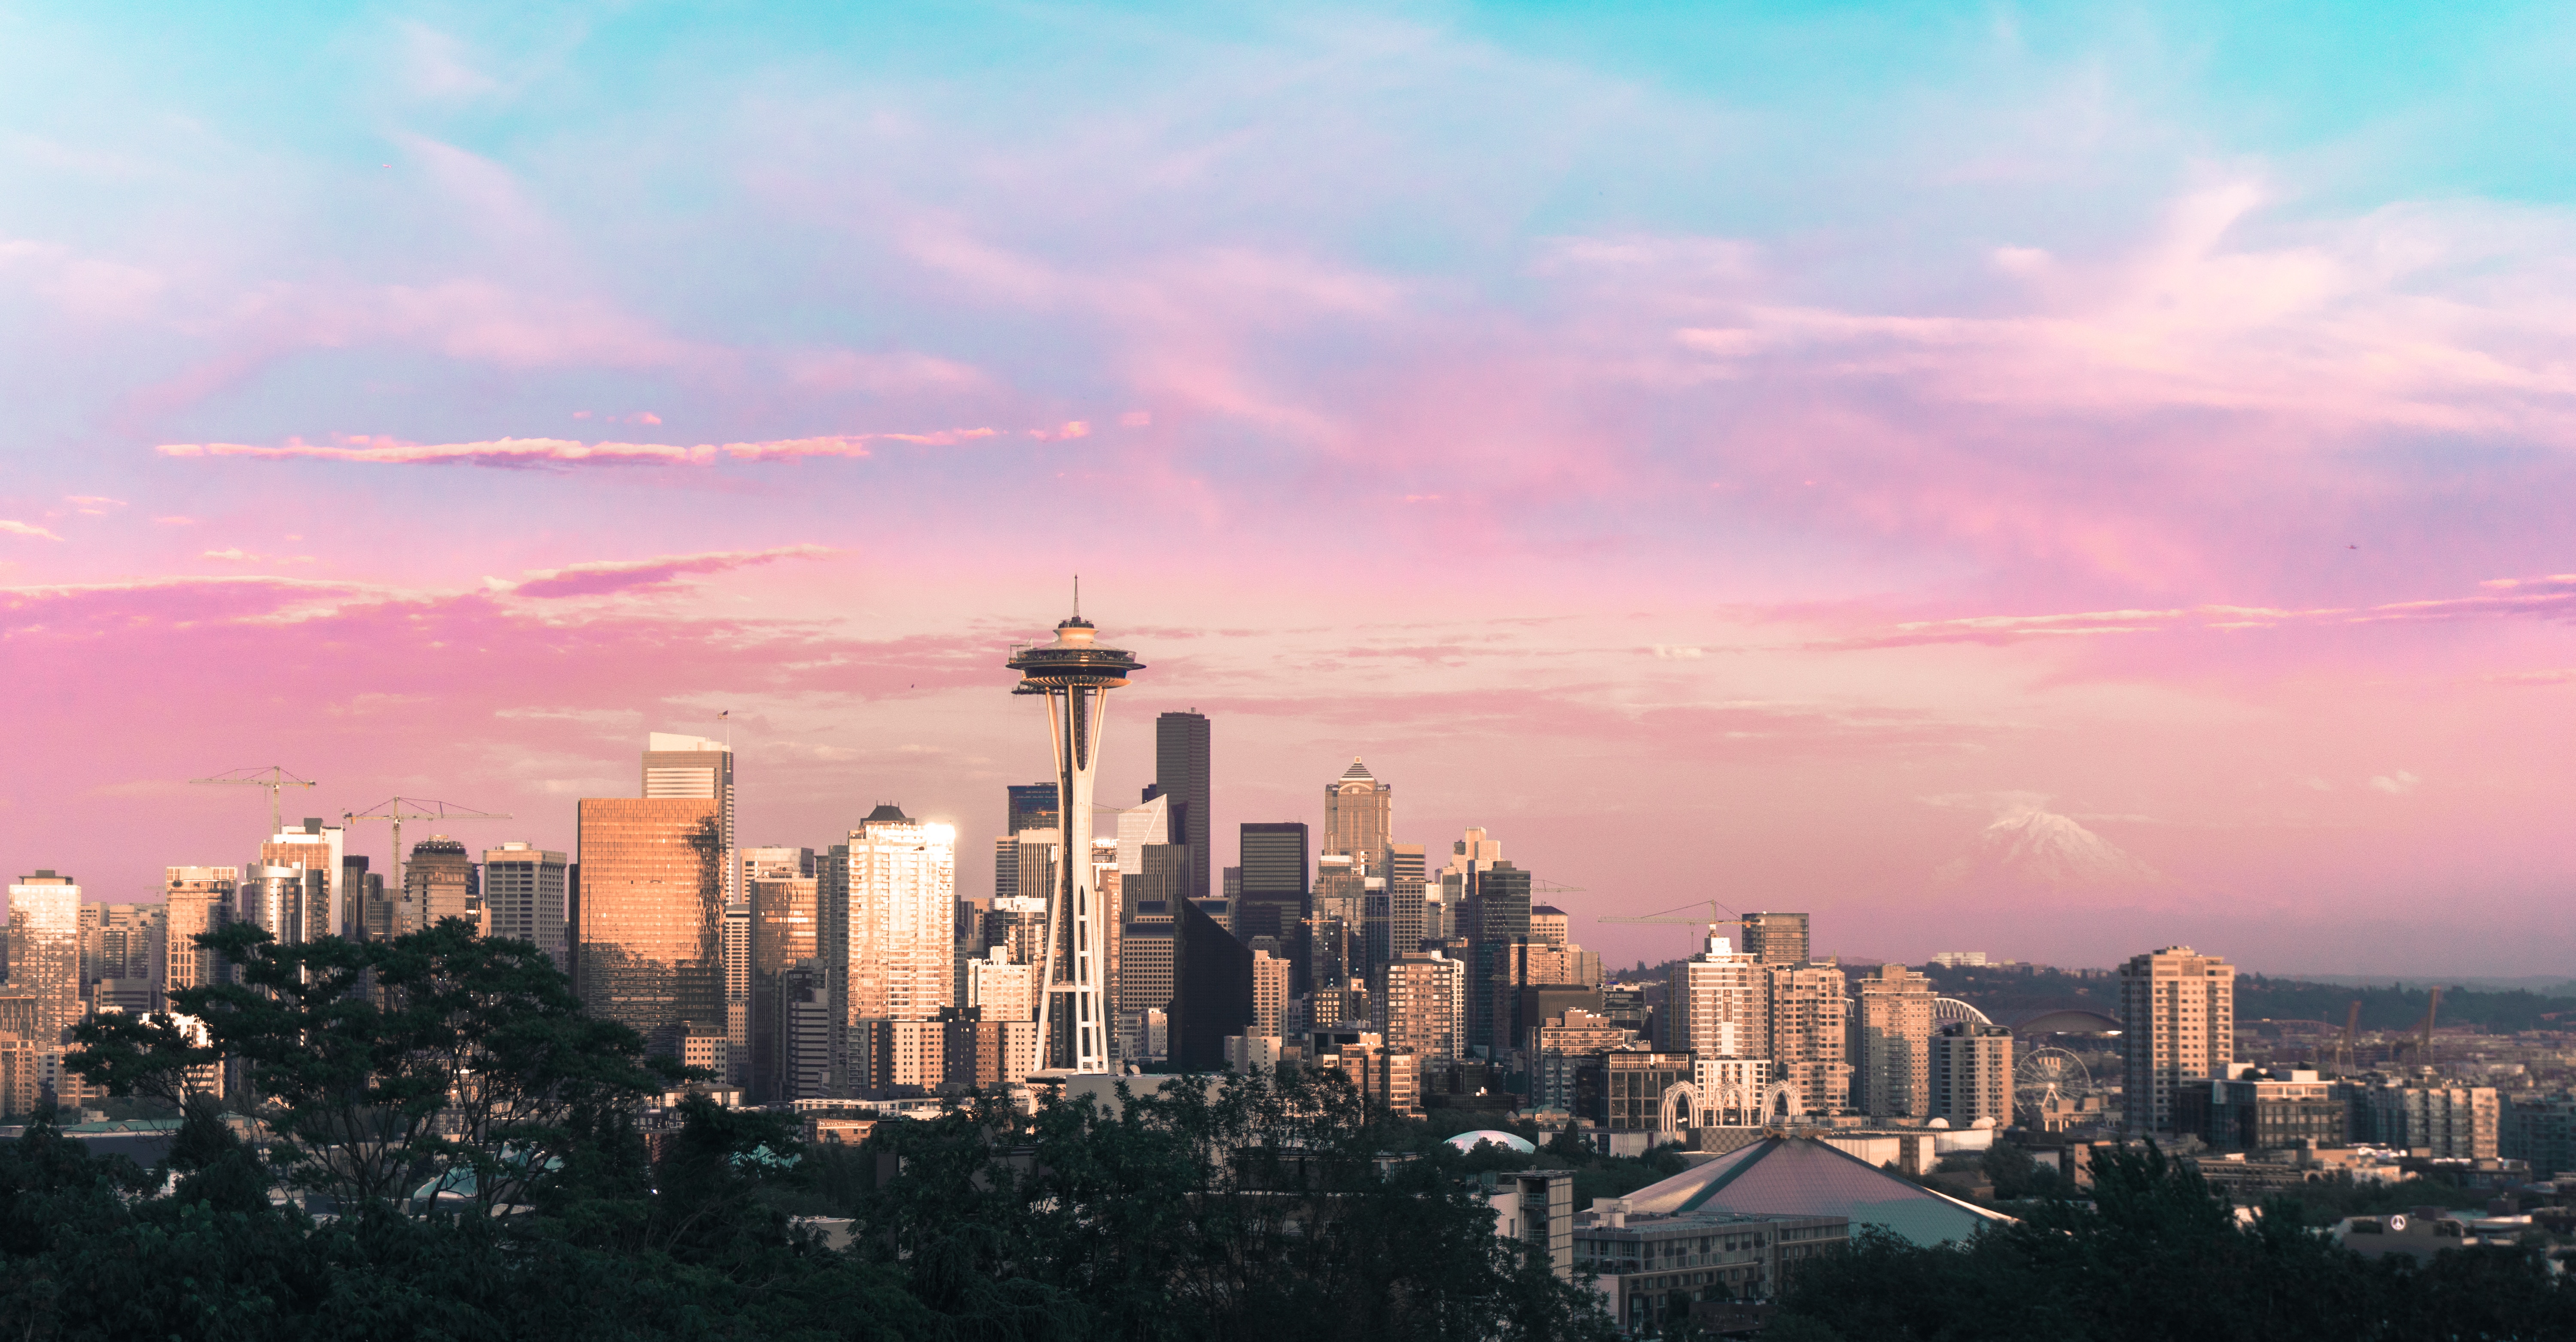 Just how gay is Seattle?